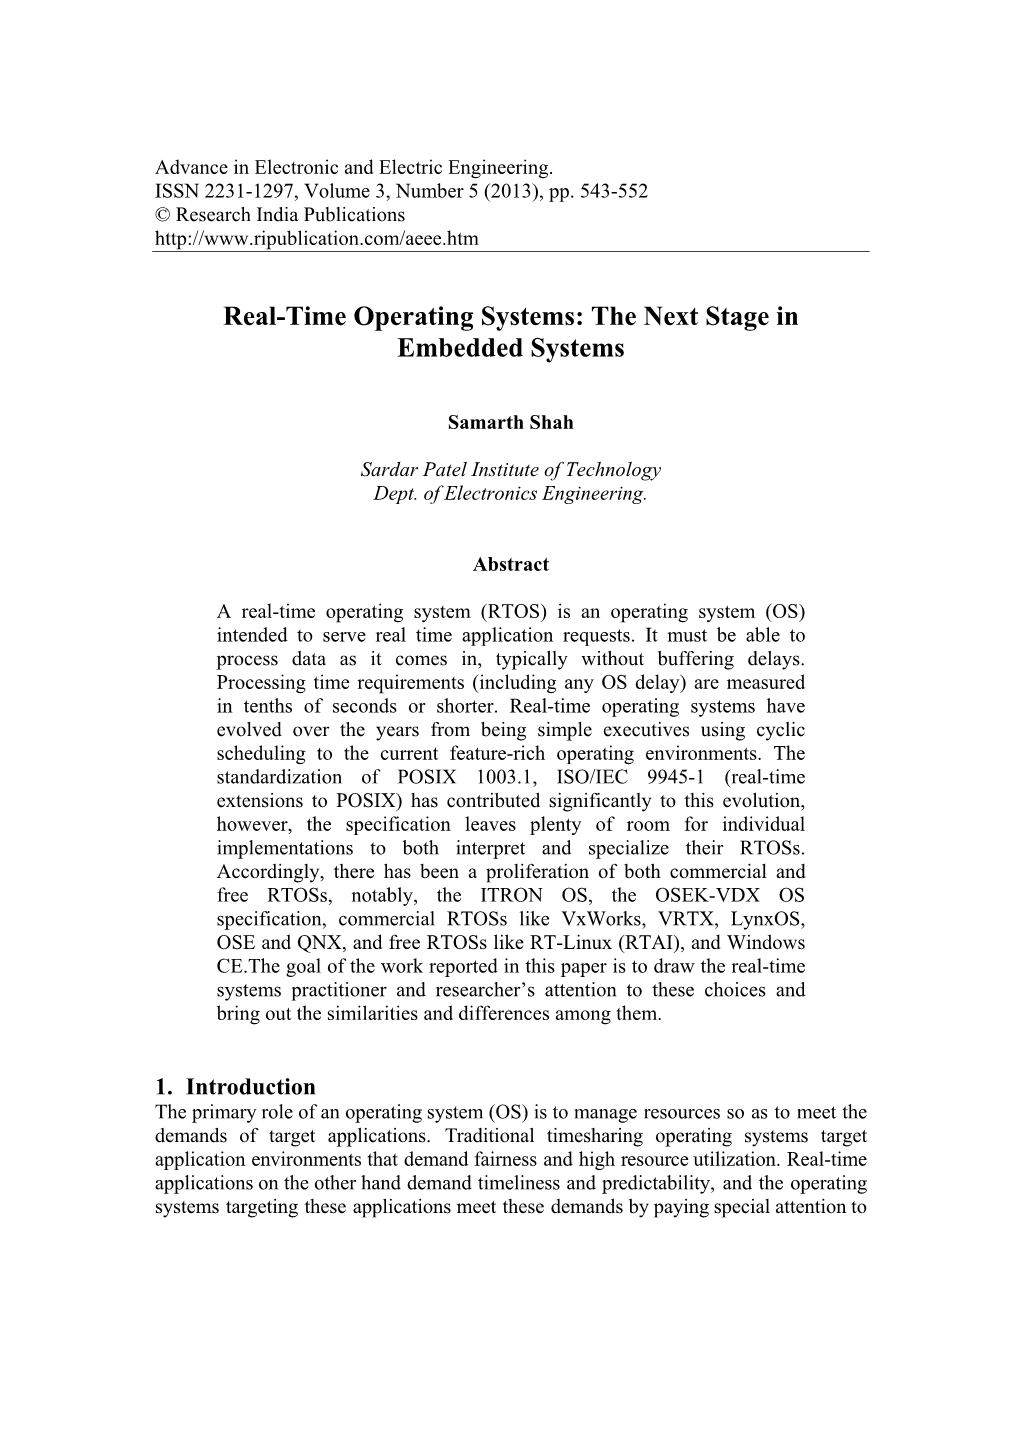 Real-Time Operating Systems: the Next Stage in Embedded Systems